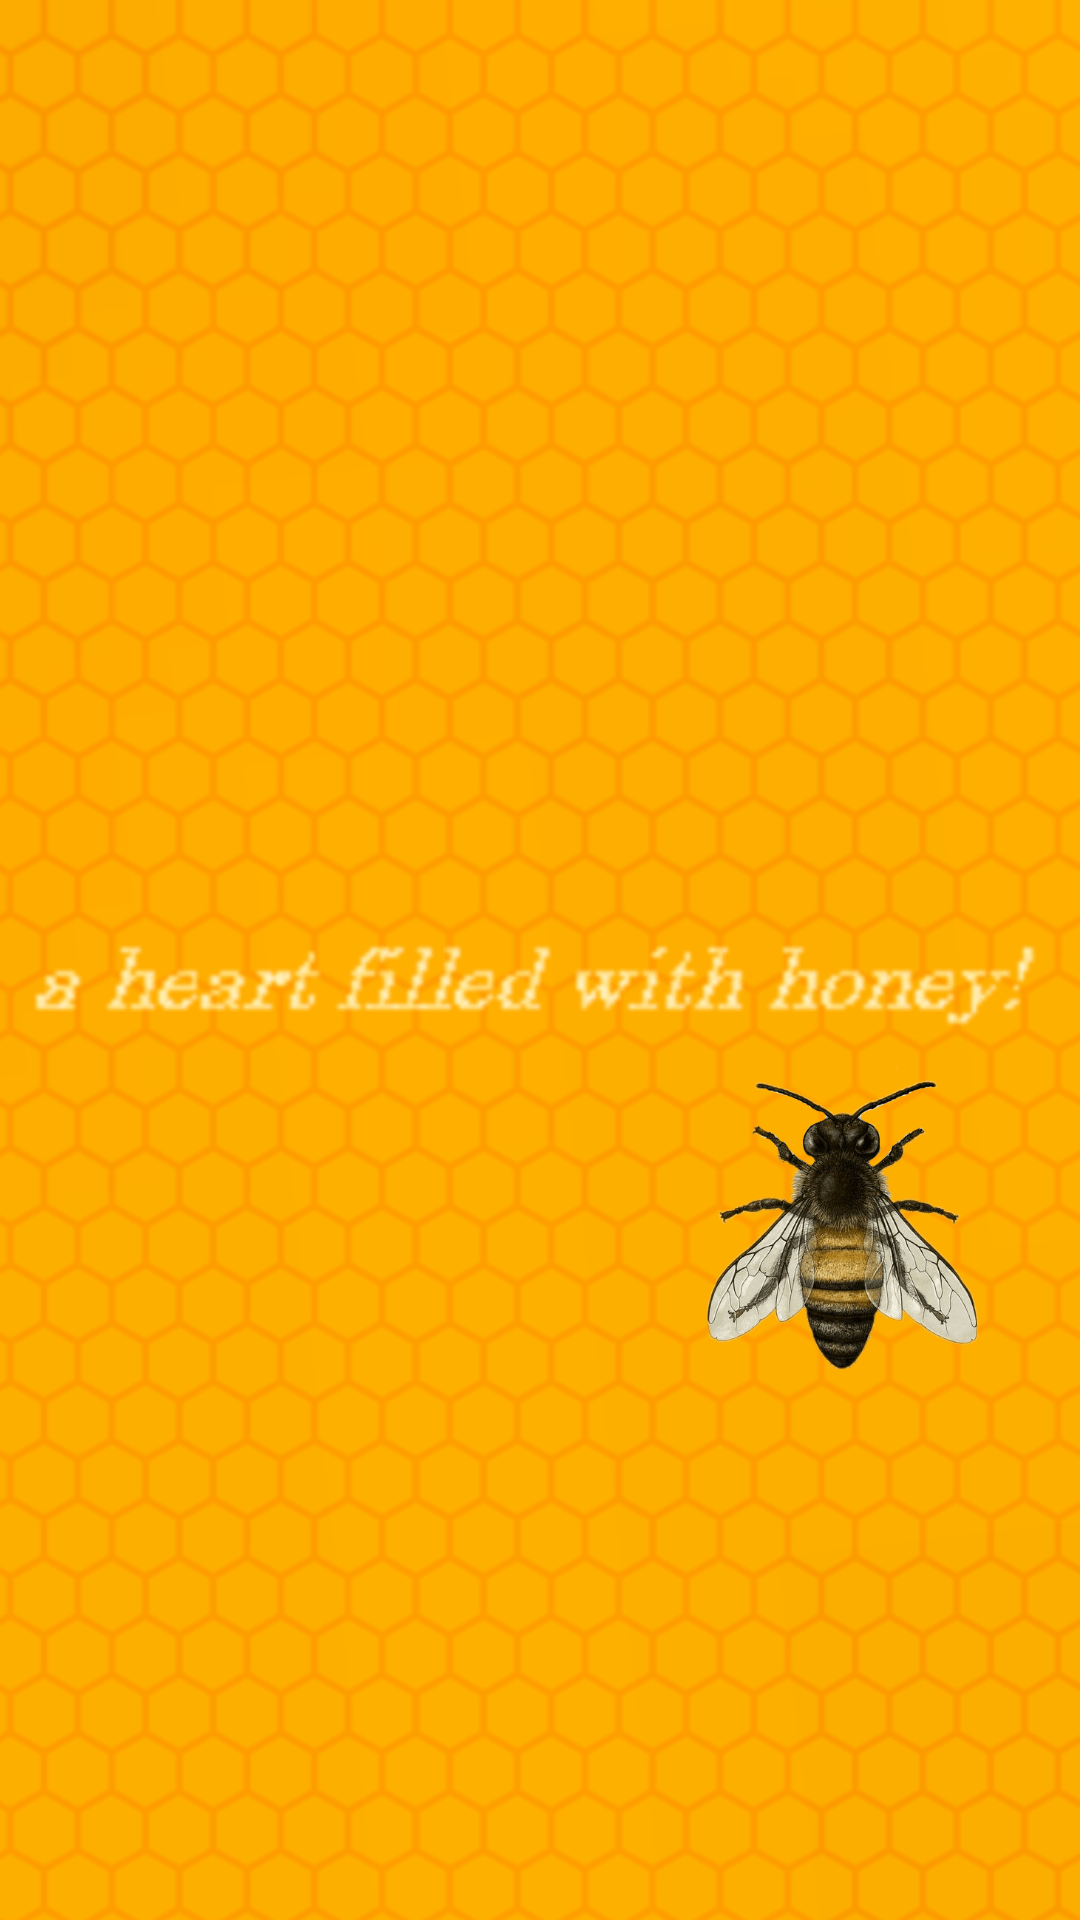 A heart filled with honey poster - Bee